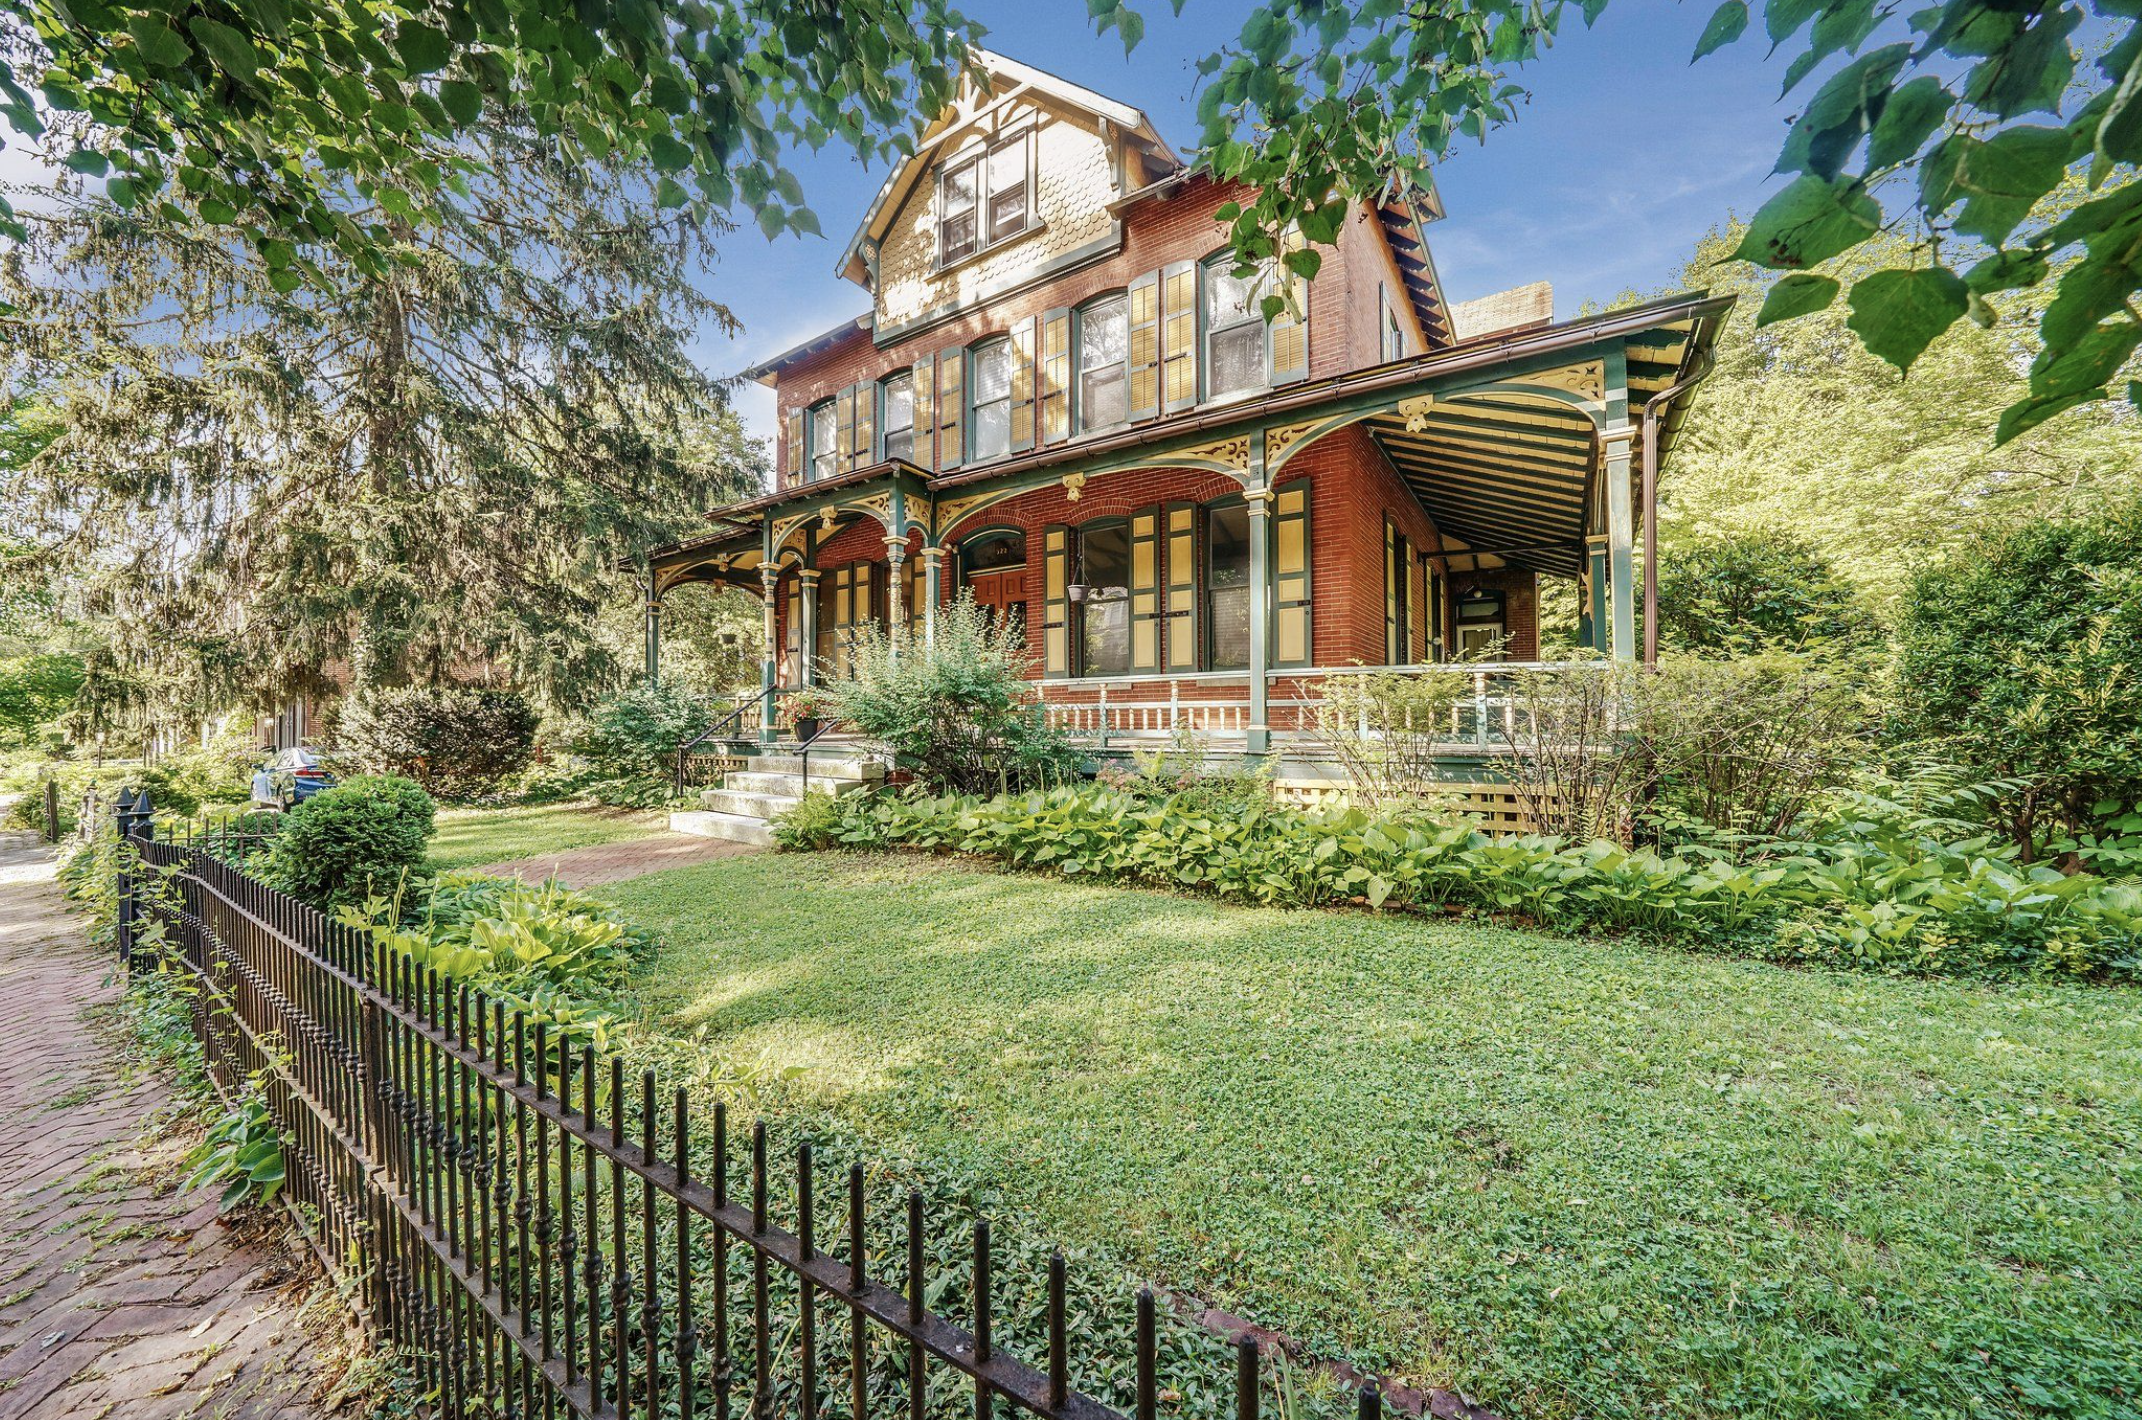  The property was built in 1887 and boasts a large wraparound porch, tall ceilings, and traditional architectural details 